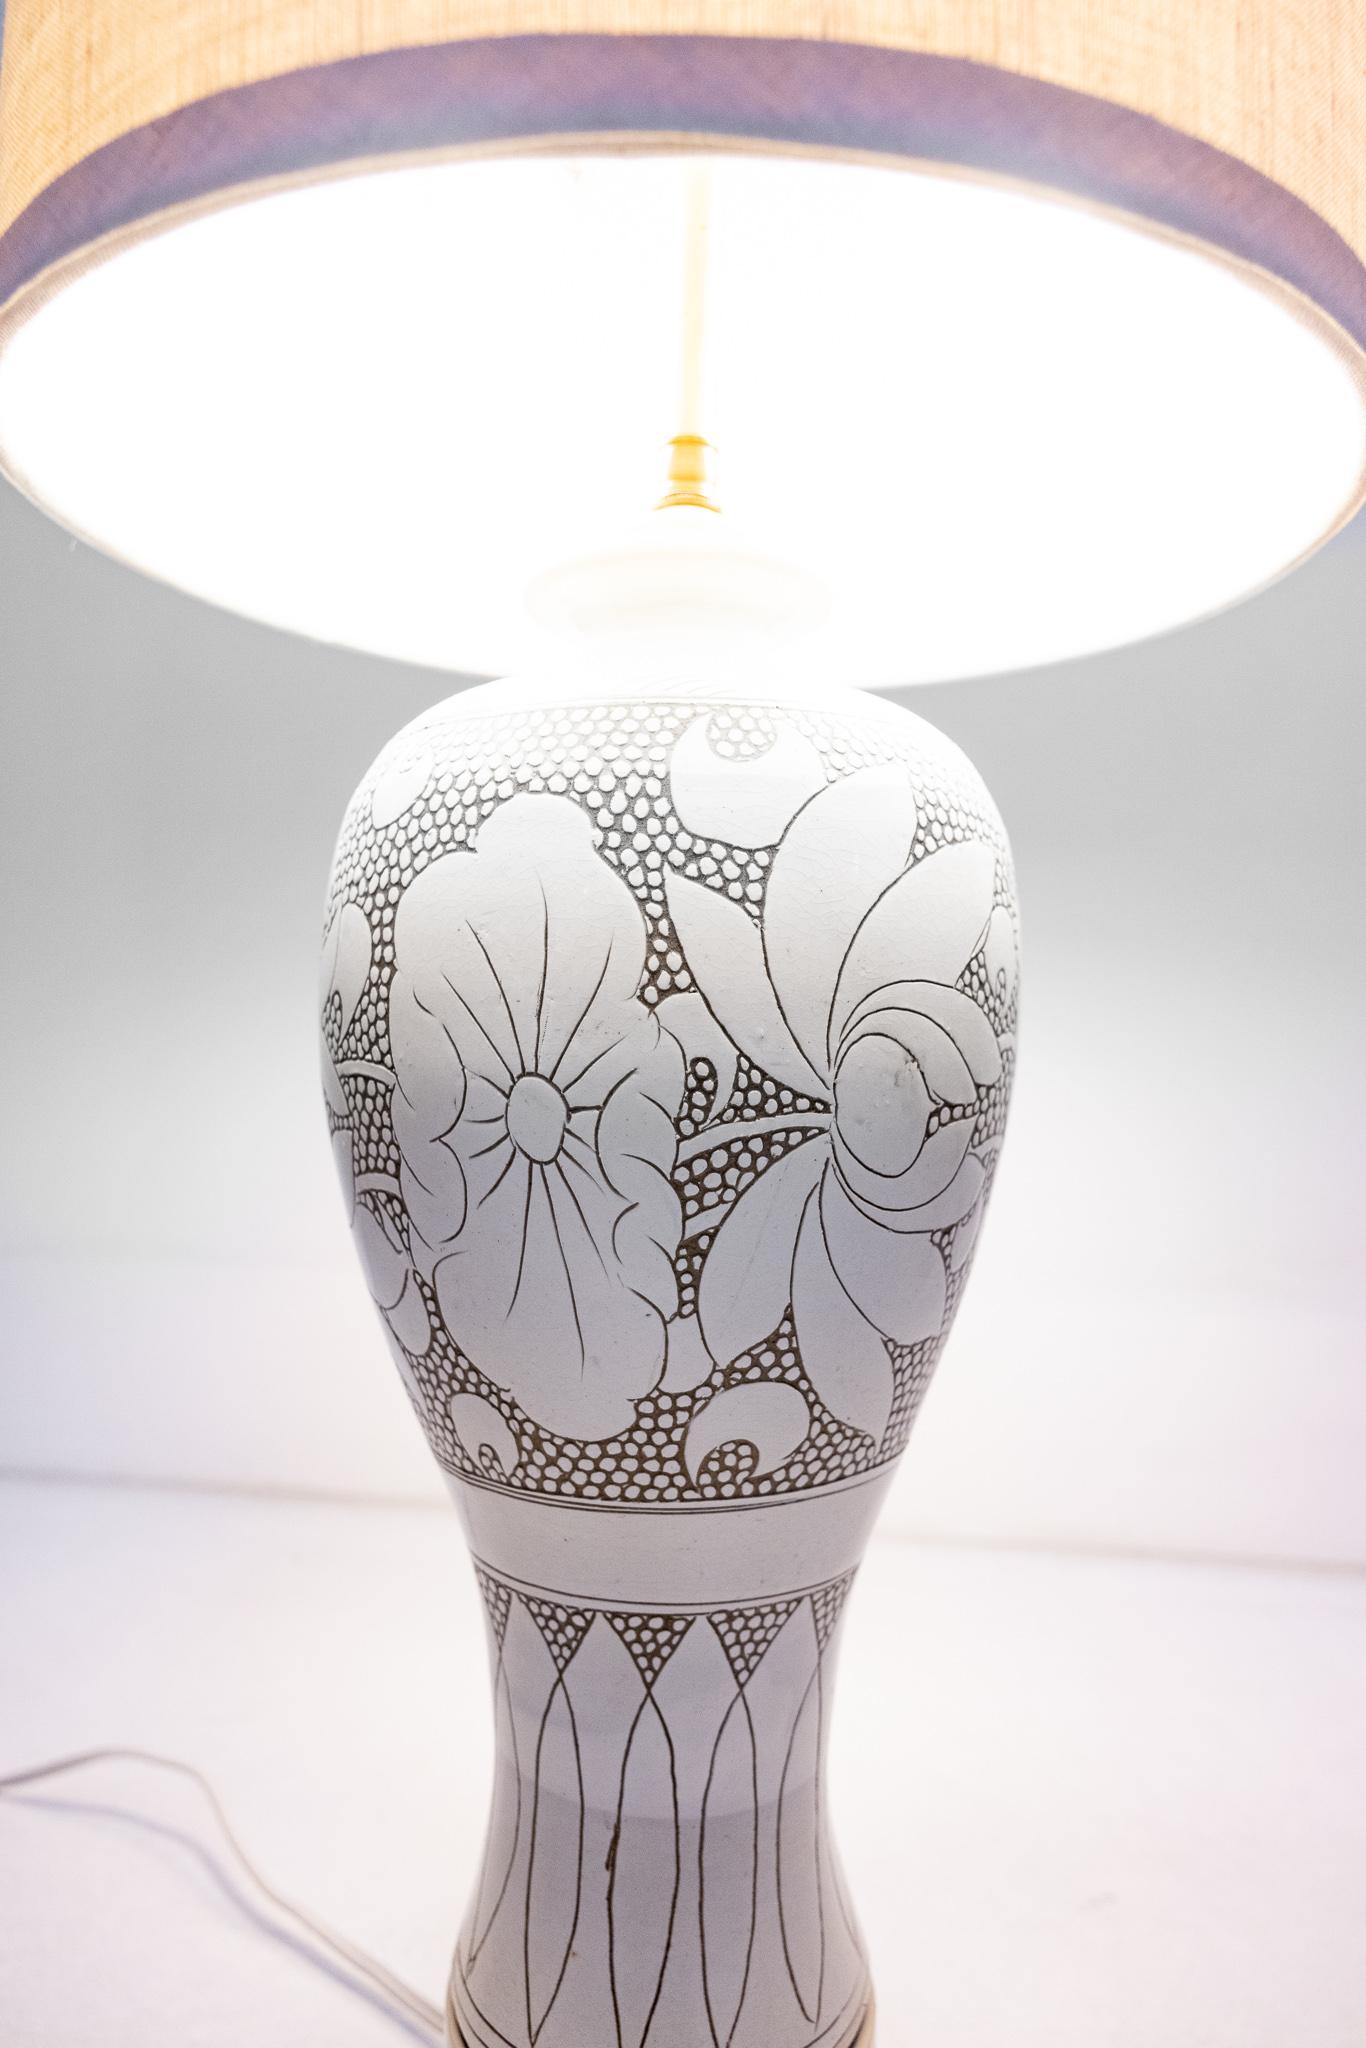 This urn lamp has an elegant floral motif and is situated on a 3 inch wooden base. Seemingly oversized it is a Haines signature treatment. It is a custom piece by Billy Haines and came from the estate of Henry Bloch of H&R Block, purchased directly